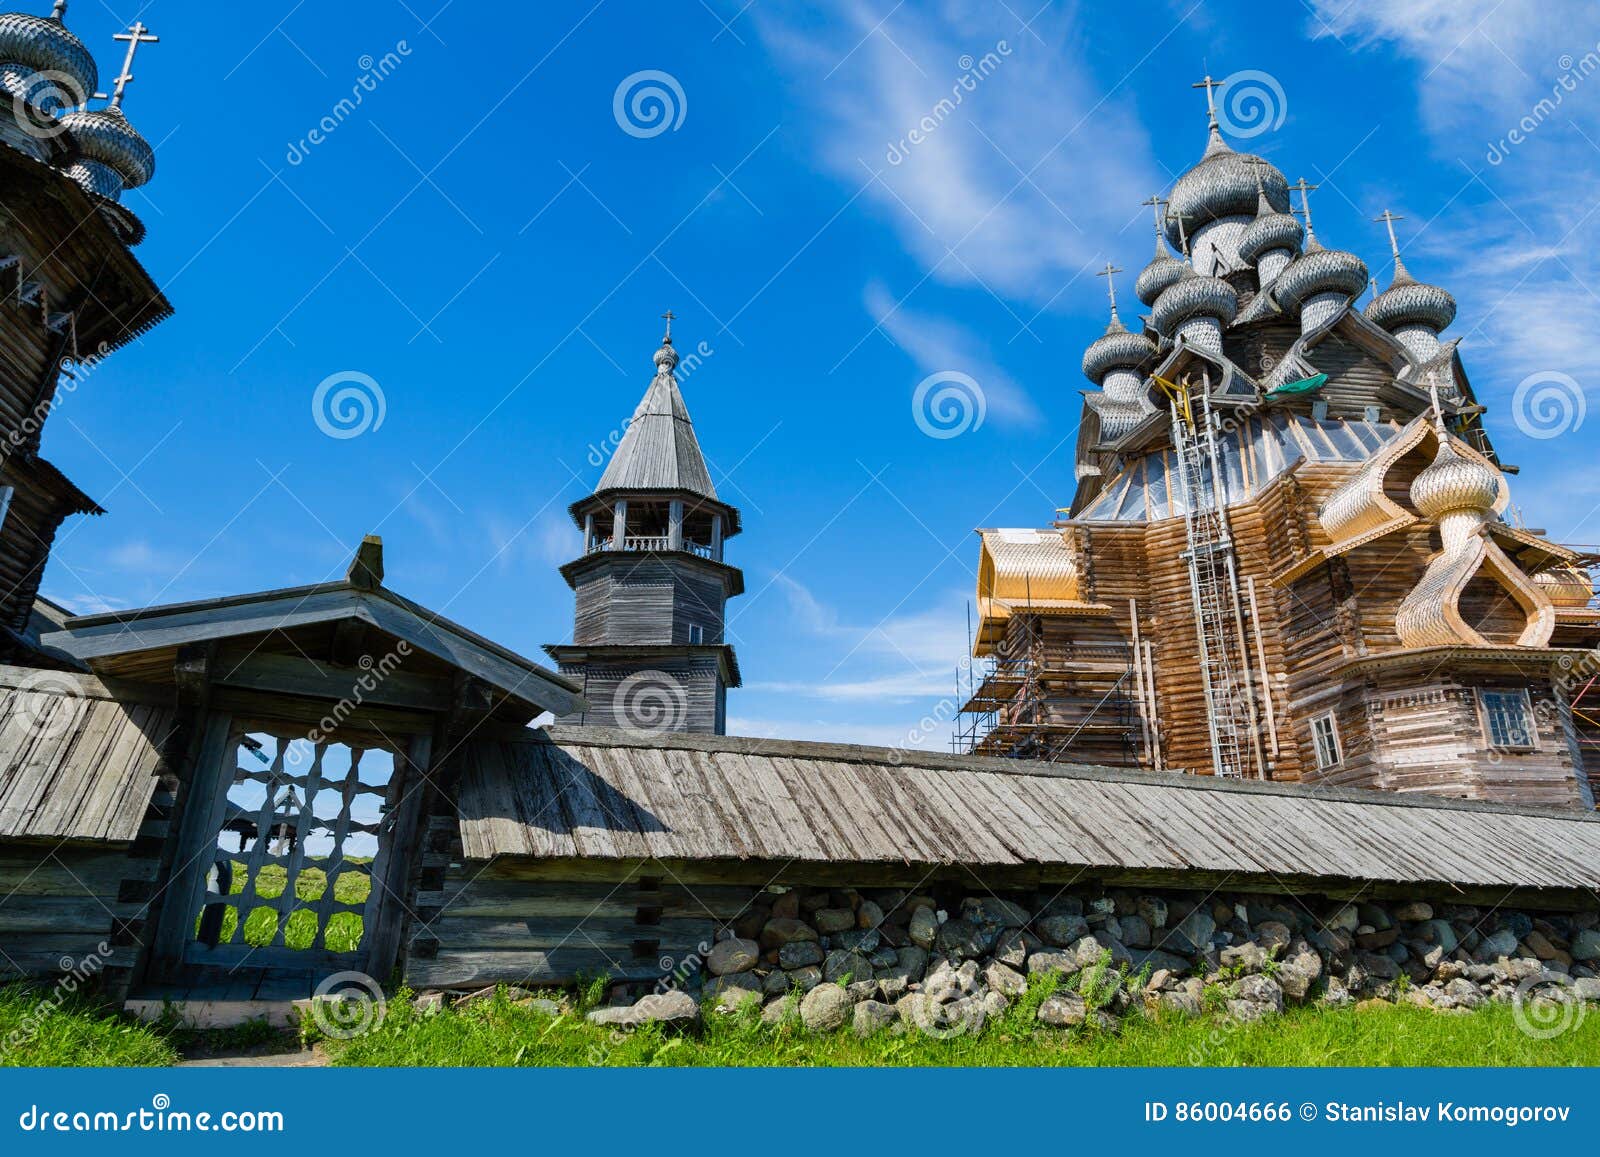 historical architectural ensemble on the island of kizhi in russ